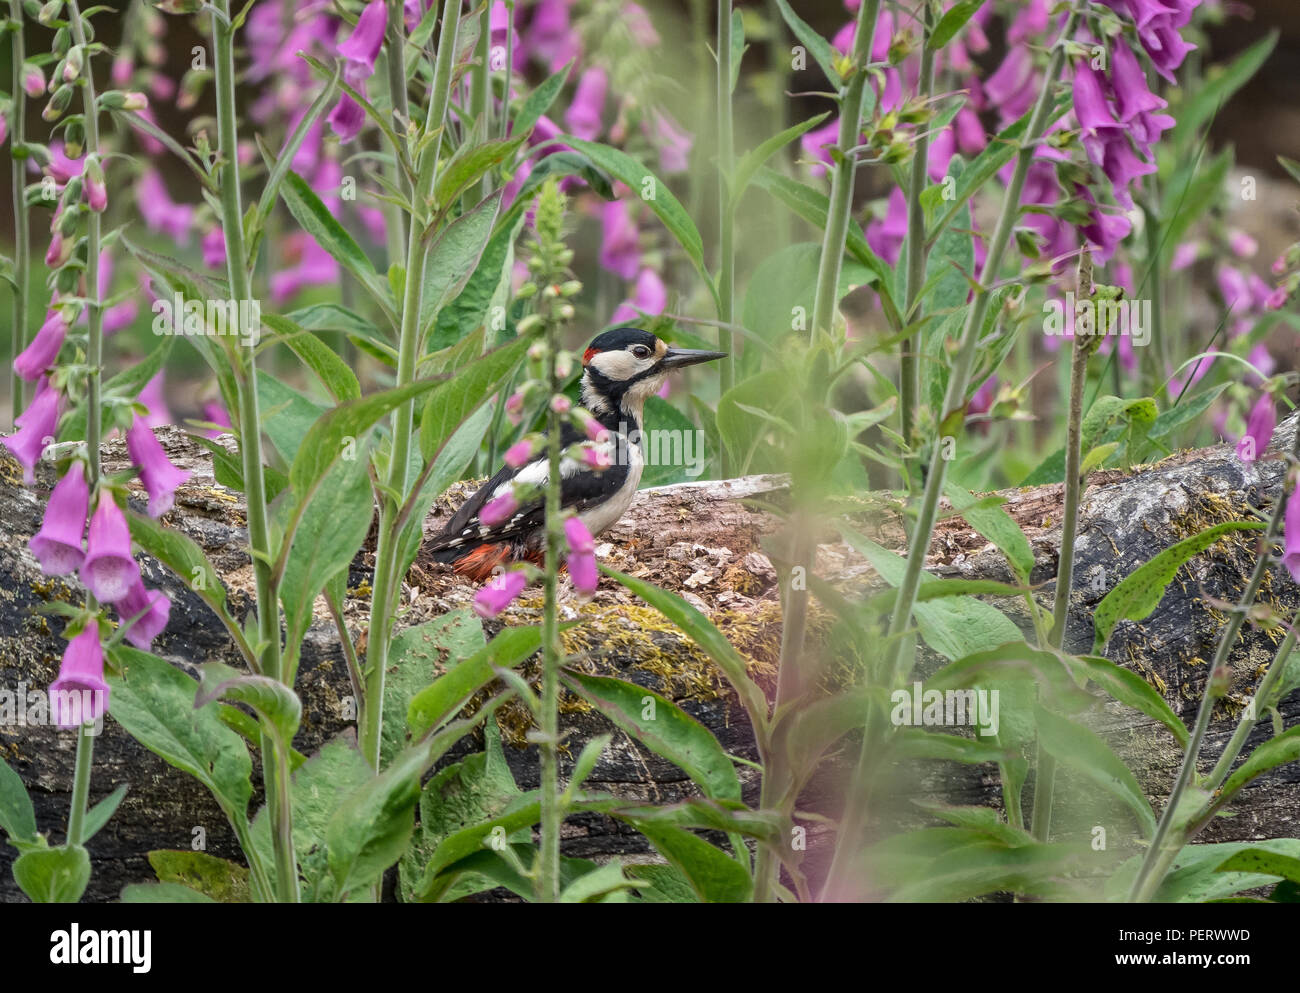 Great Spotted Woodpecker on ground among foxgloves Stock Photo